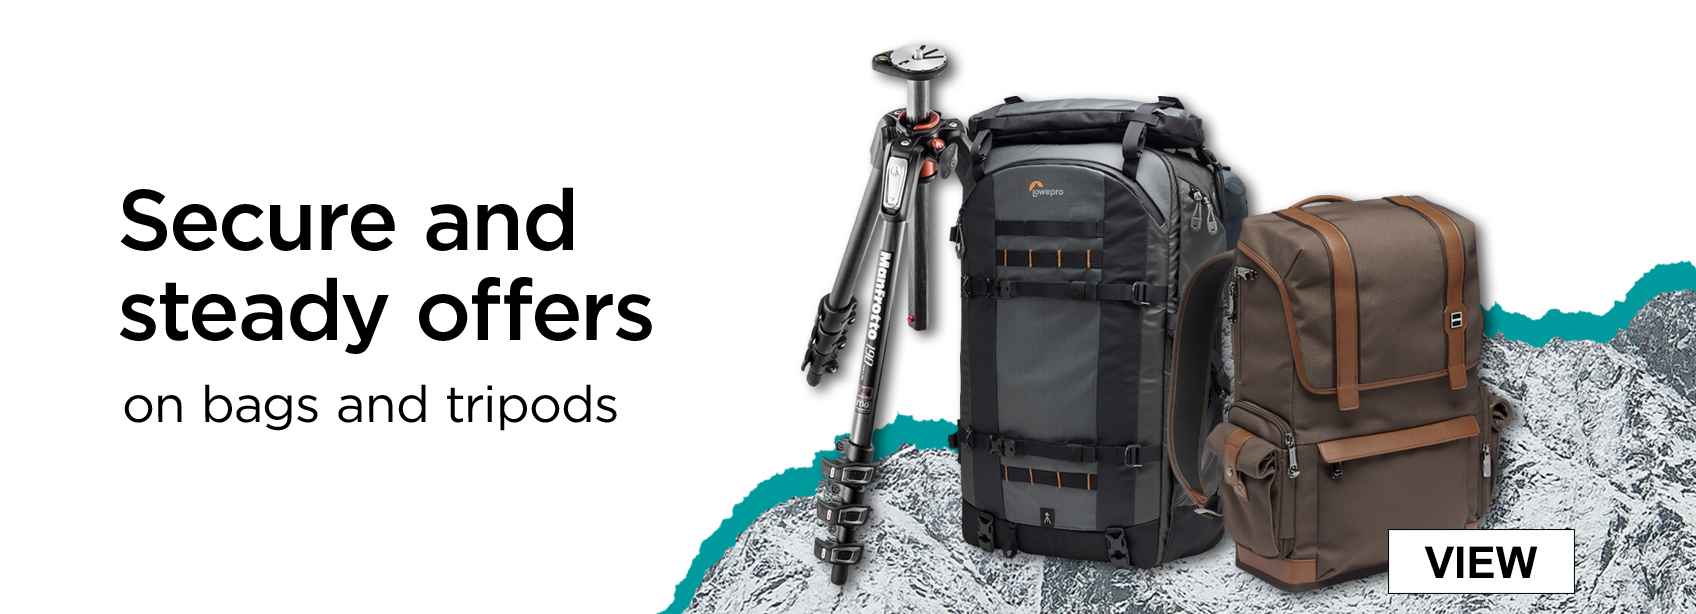 Secure and Steady offers on bags and tripods